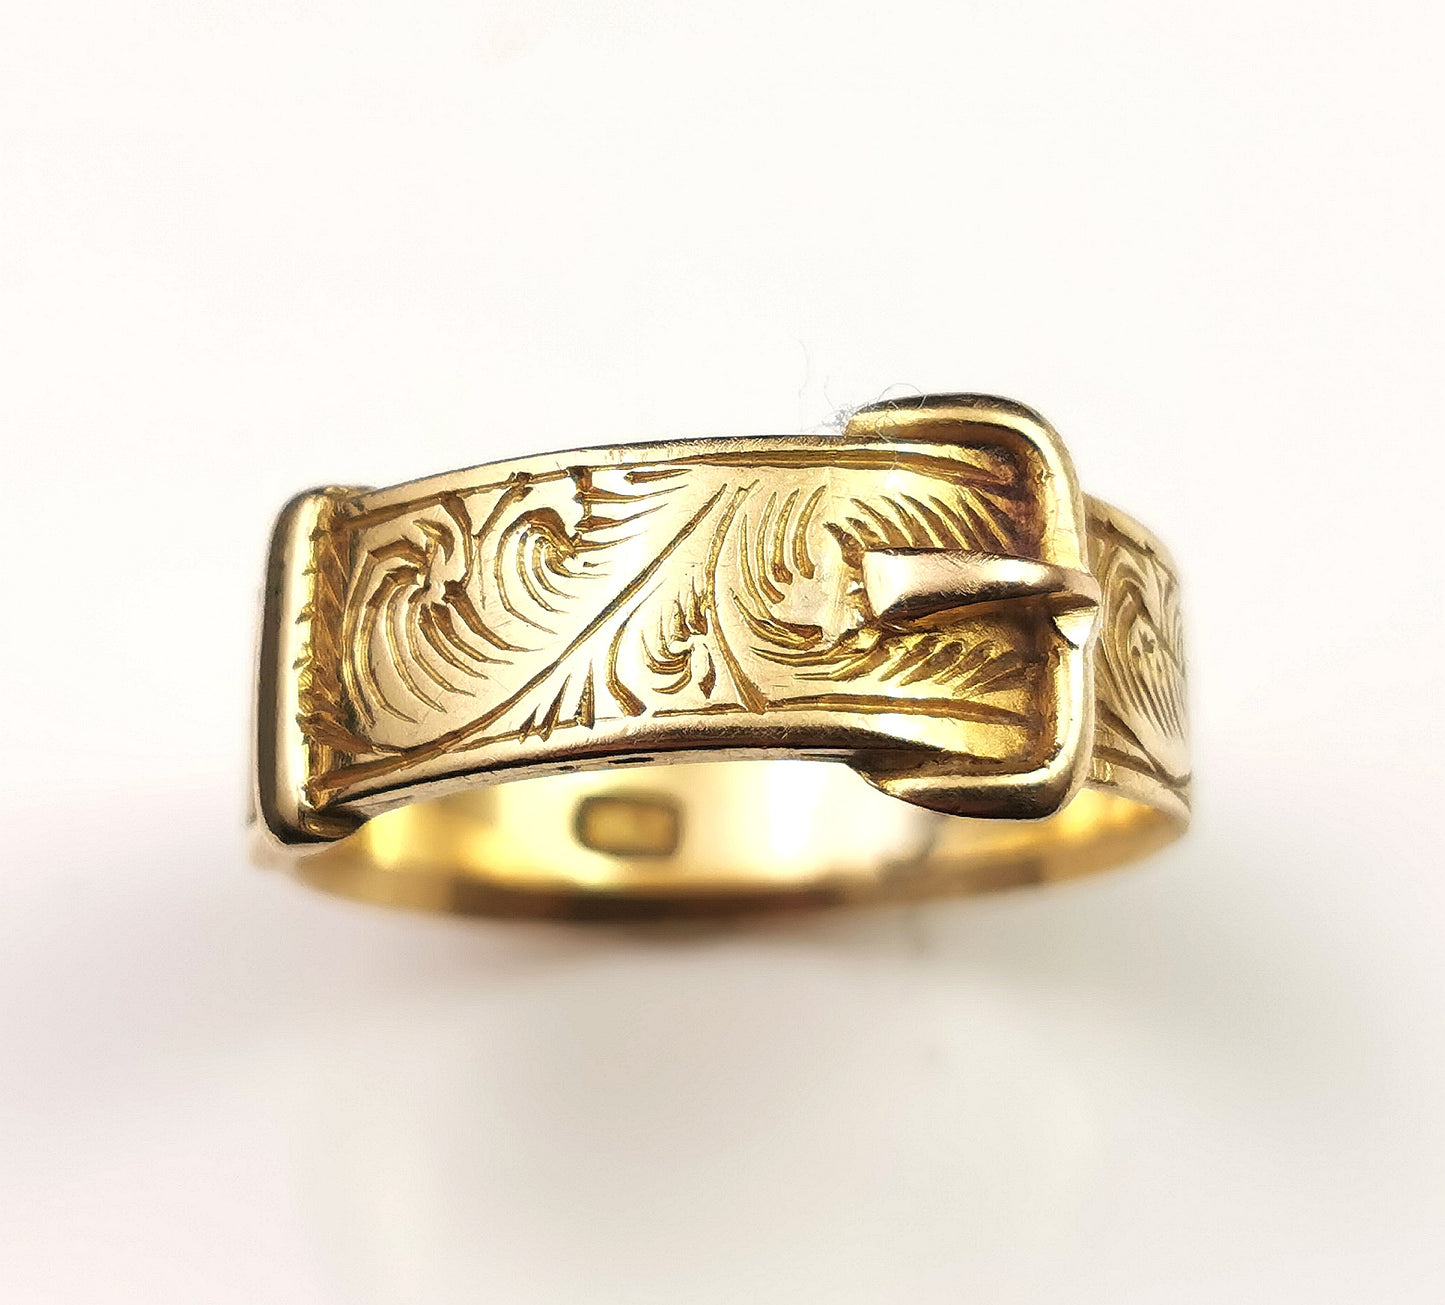 Antique 18ct gold Buckle ring, engraved band